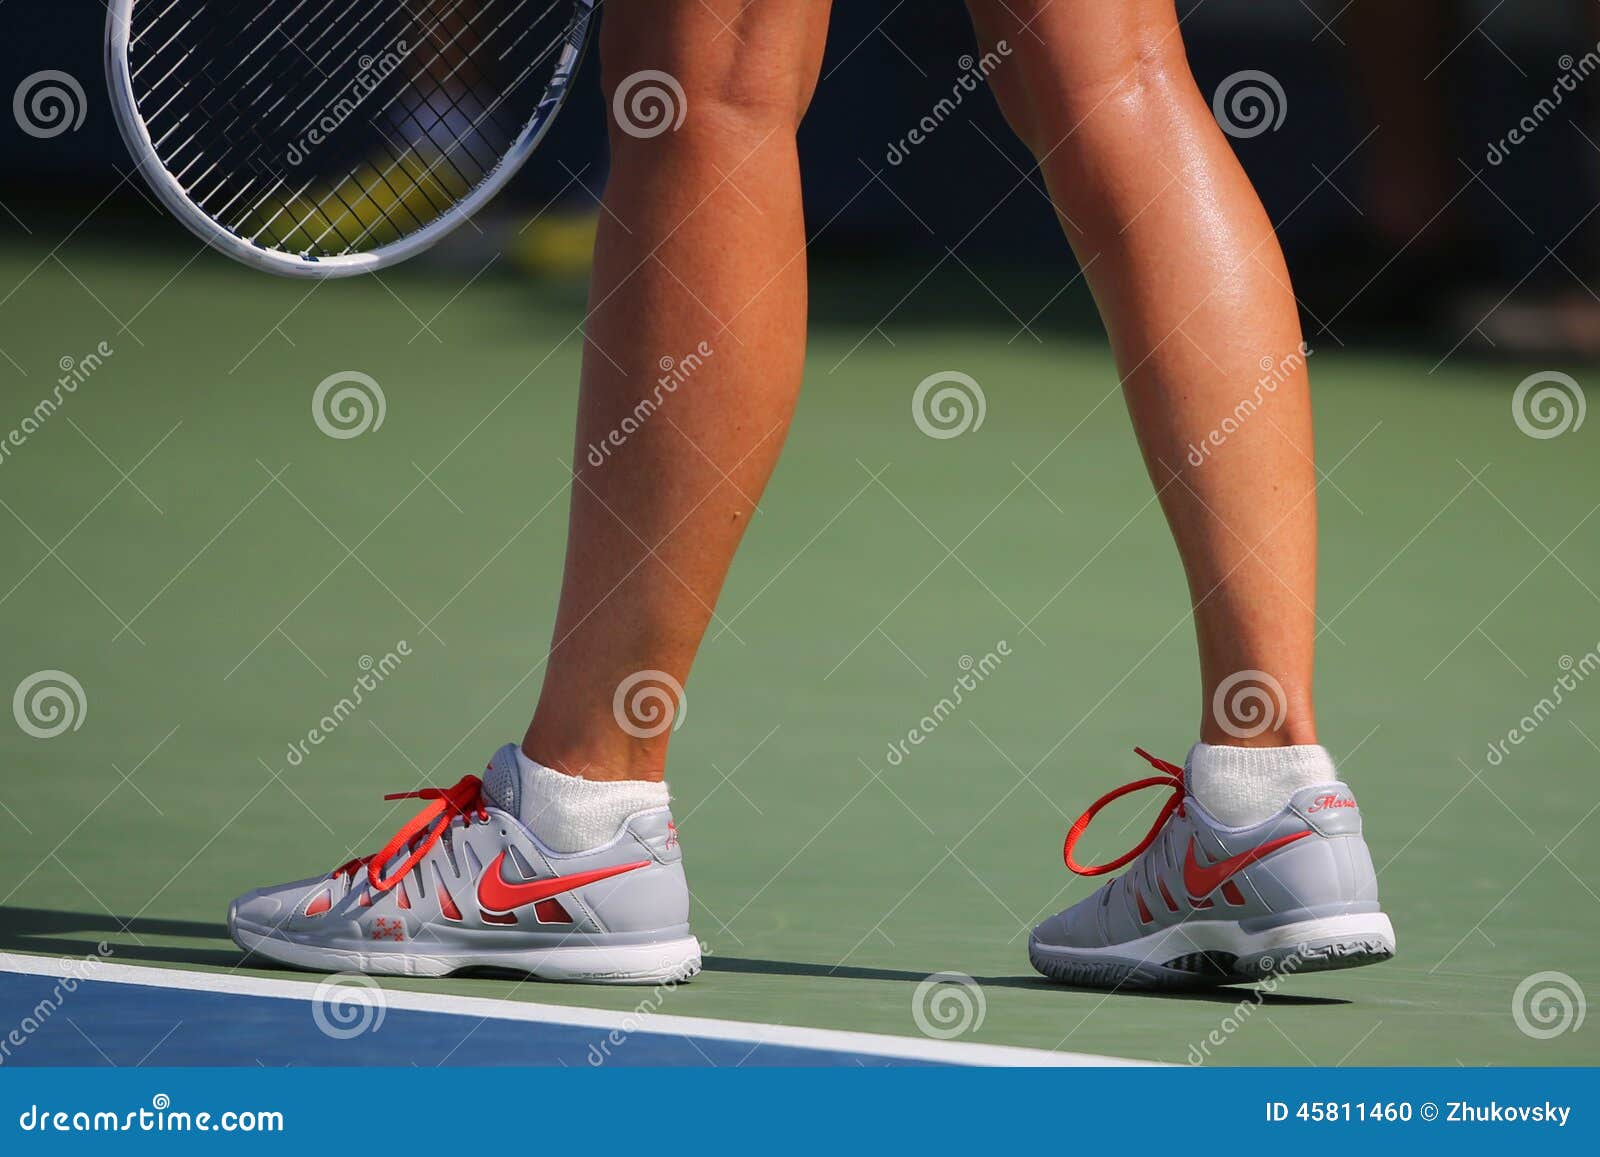 nike us open shoes